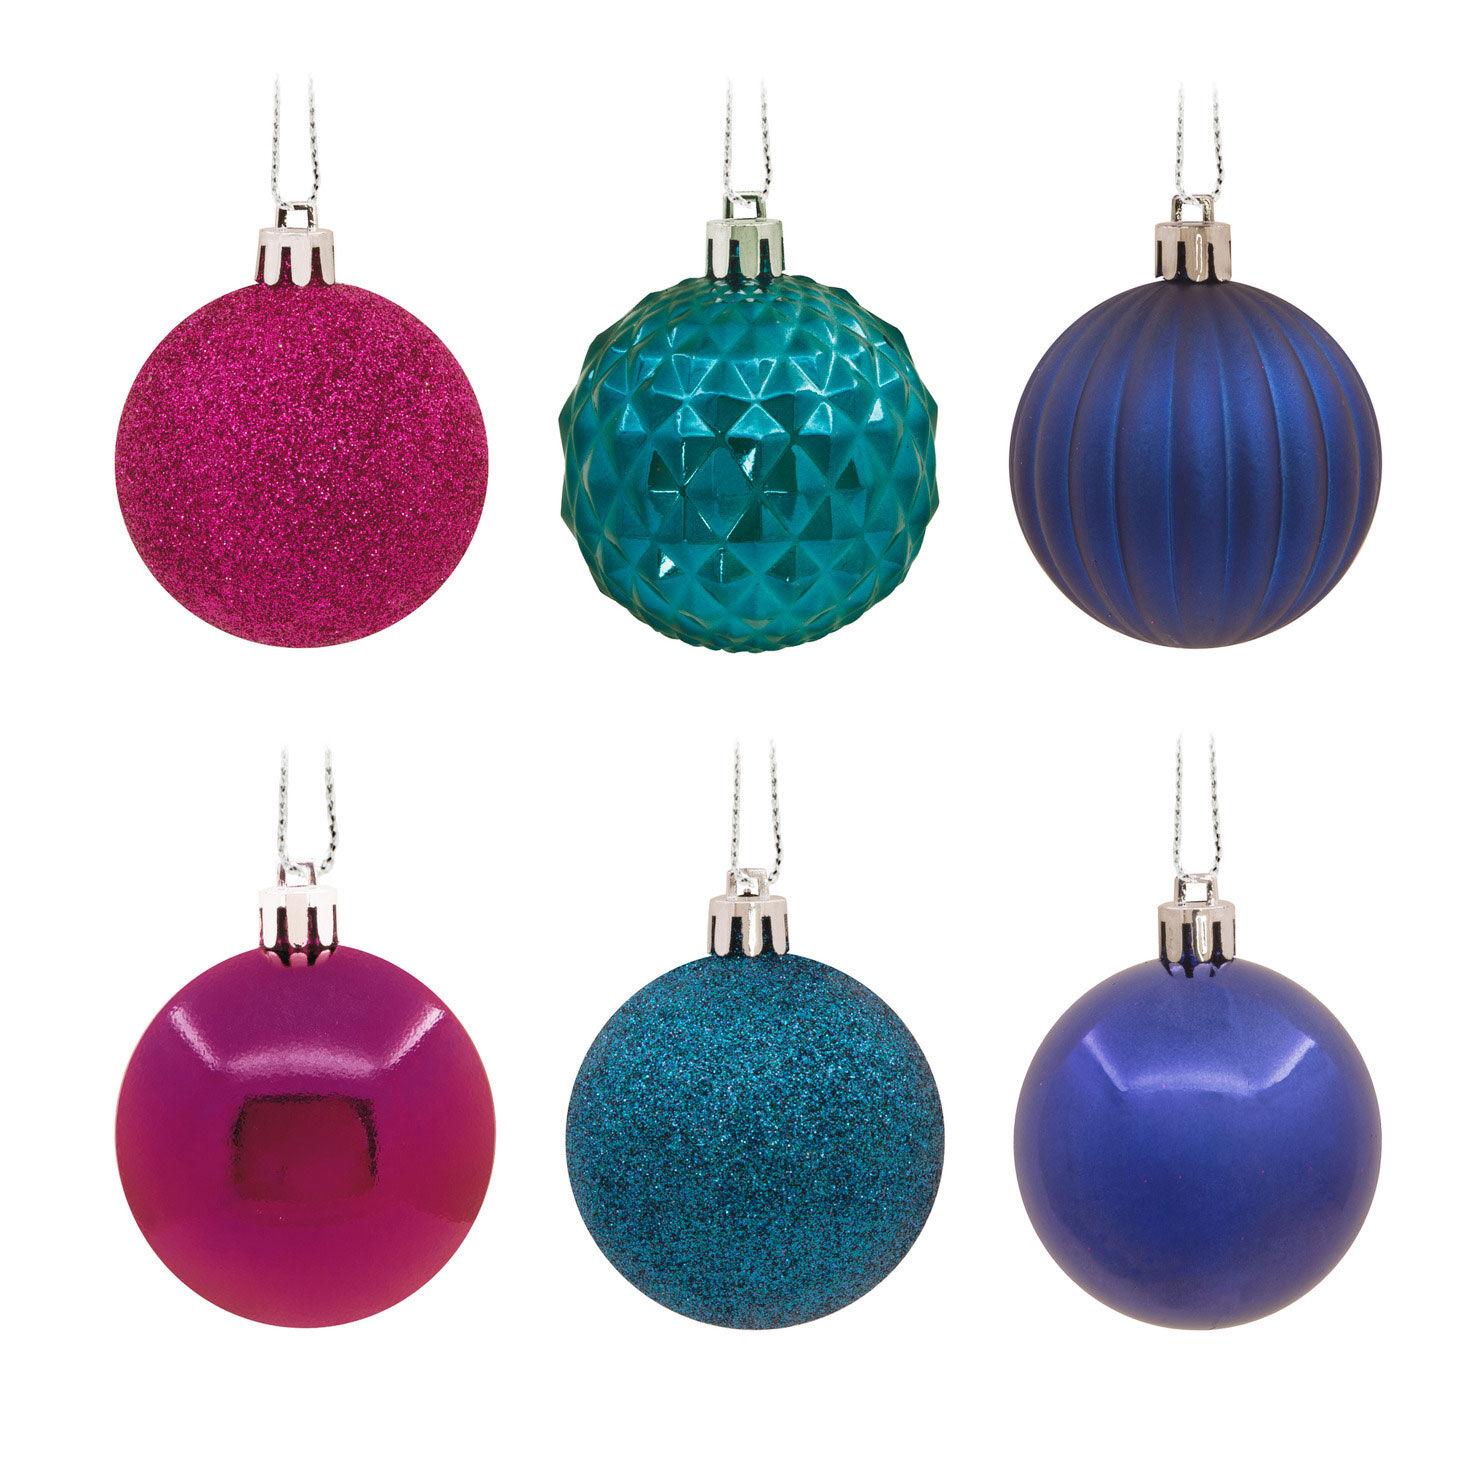 30-Piece Magenta, Teal, Navy Shatterproof Christmas Ornaments Set for only USD 9.49 | Hallmark